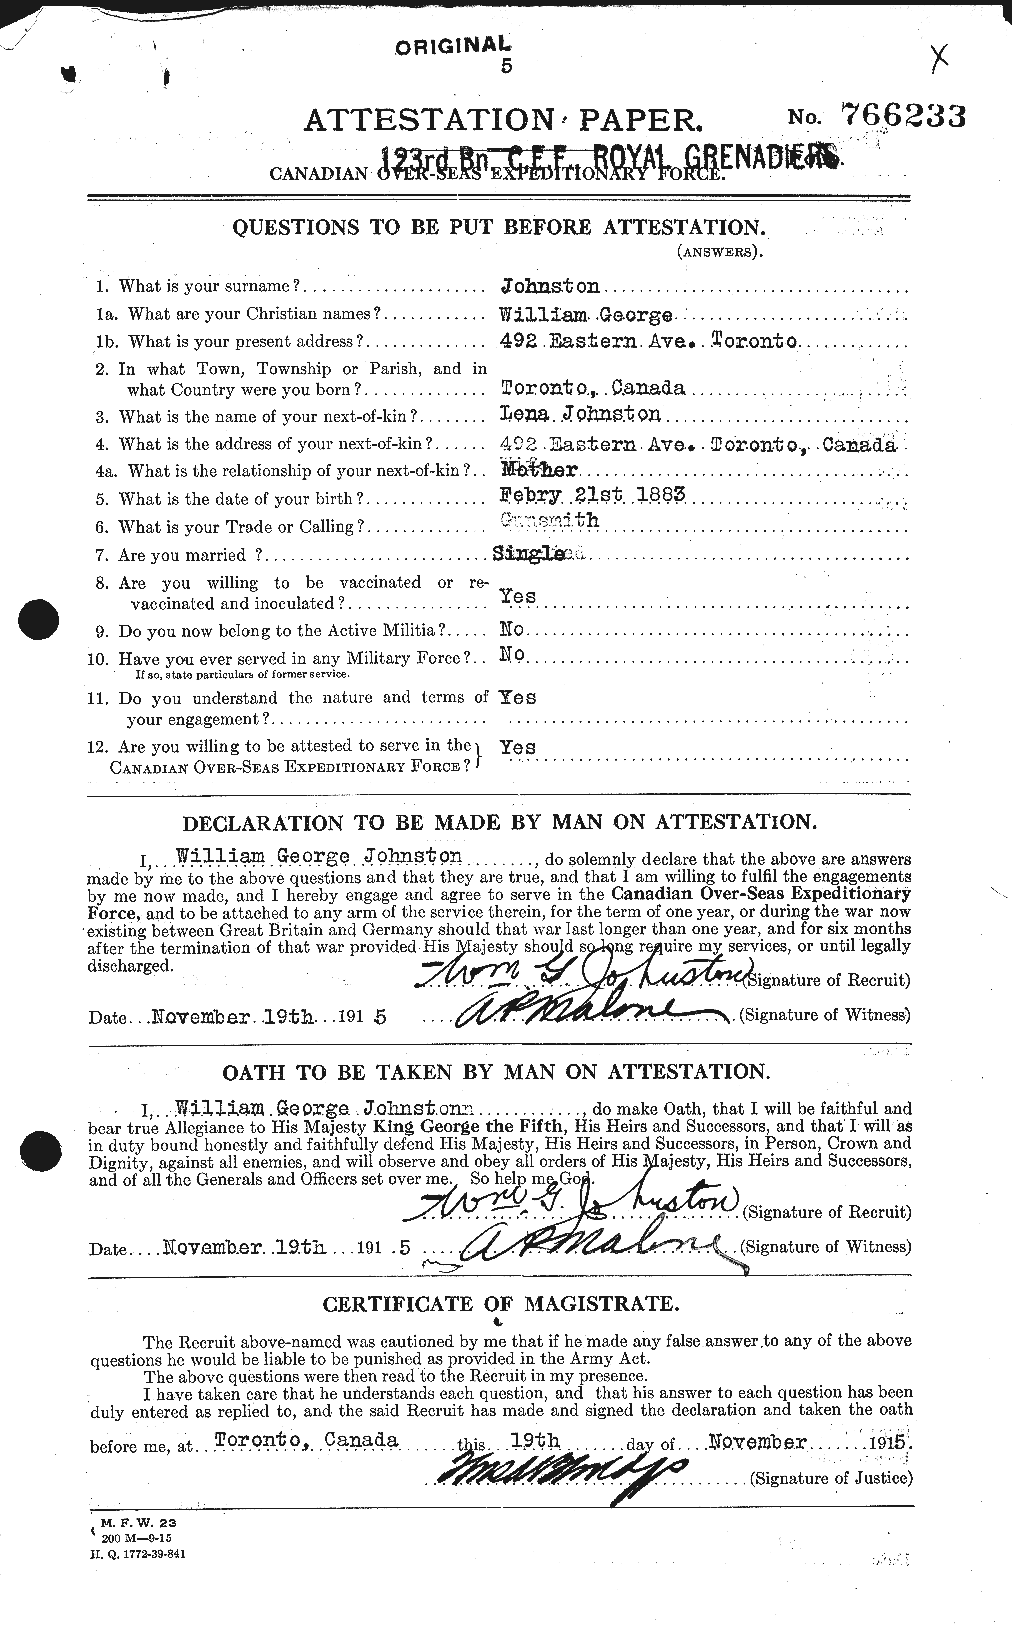 Personnel Records of the First World War - CEF 427328a